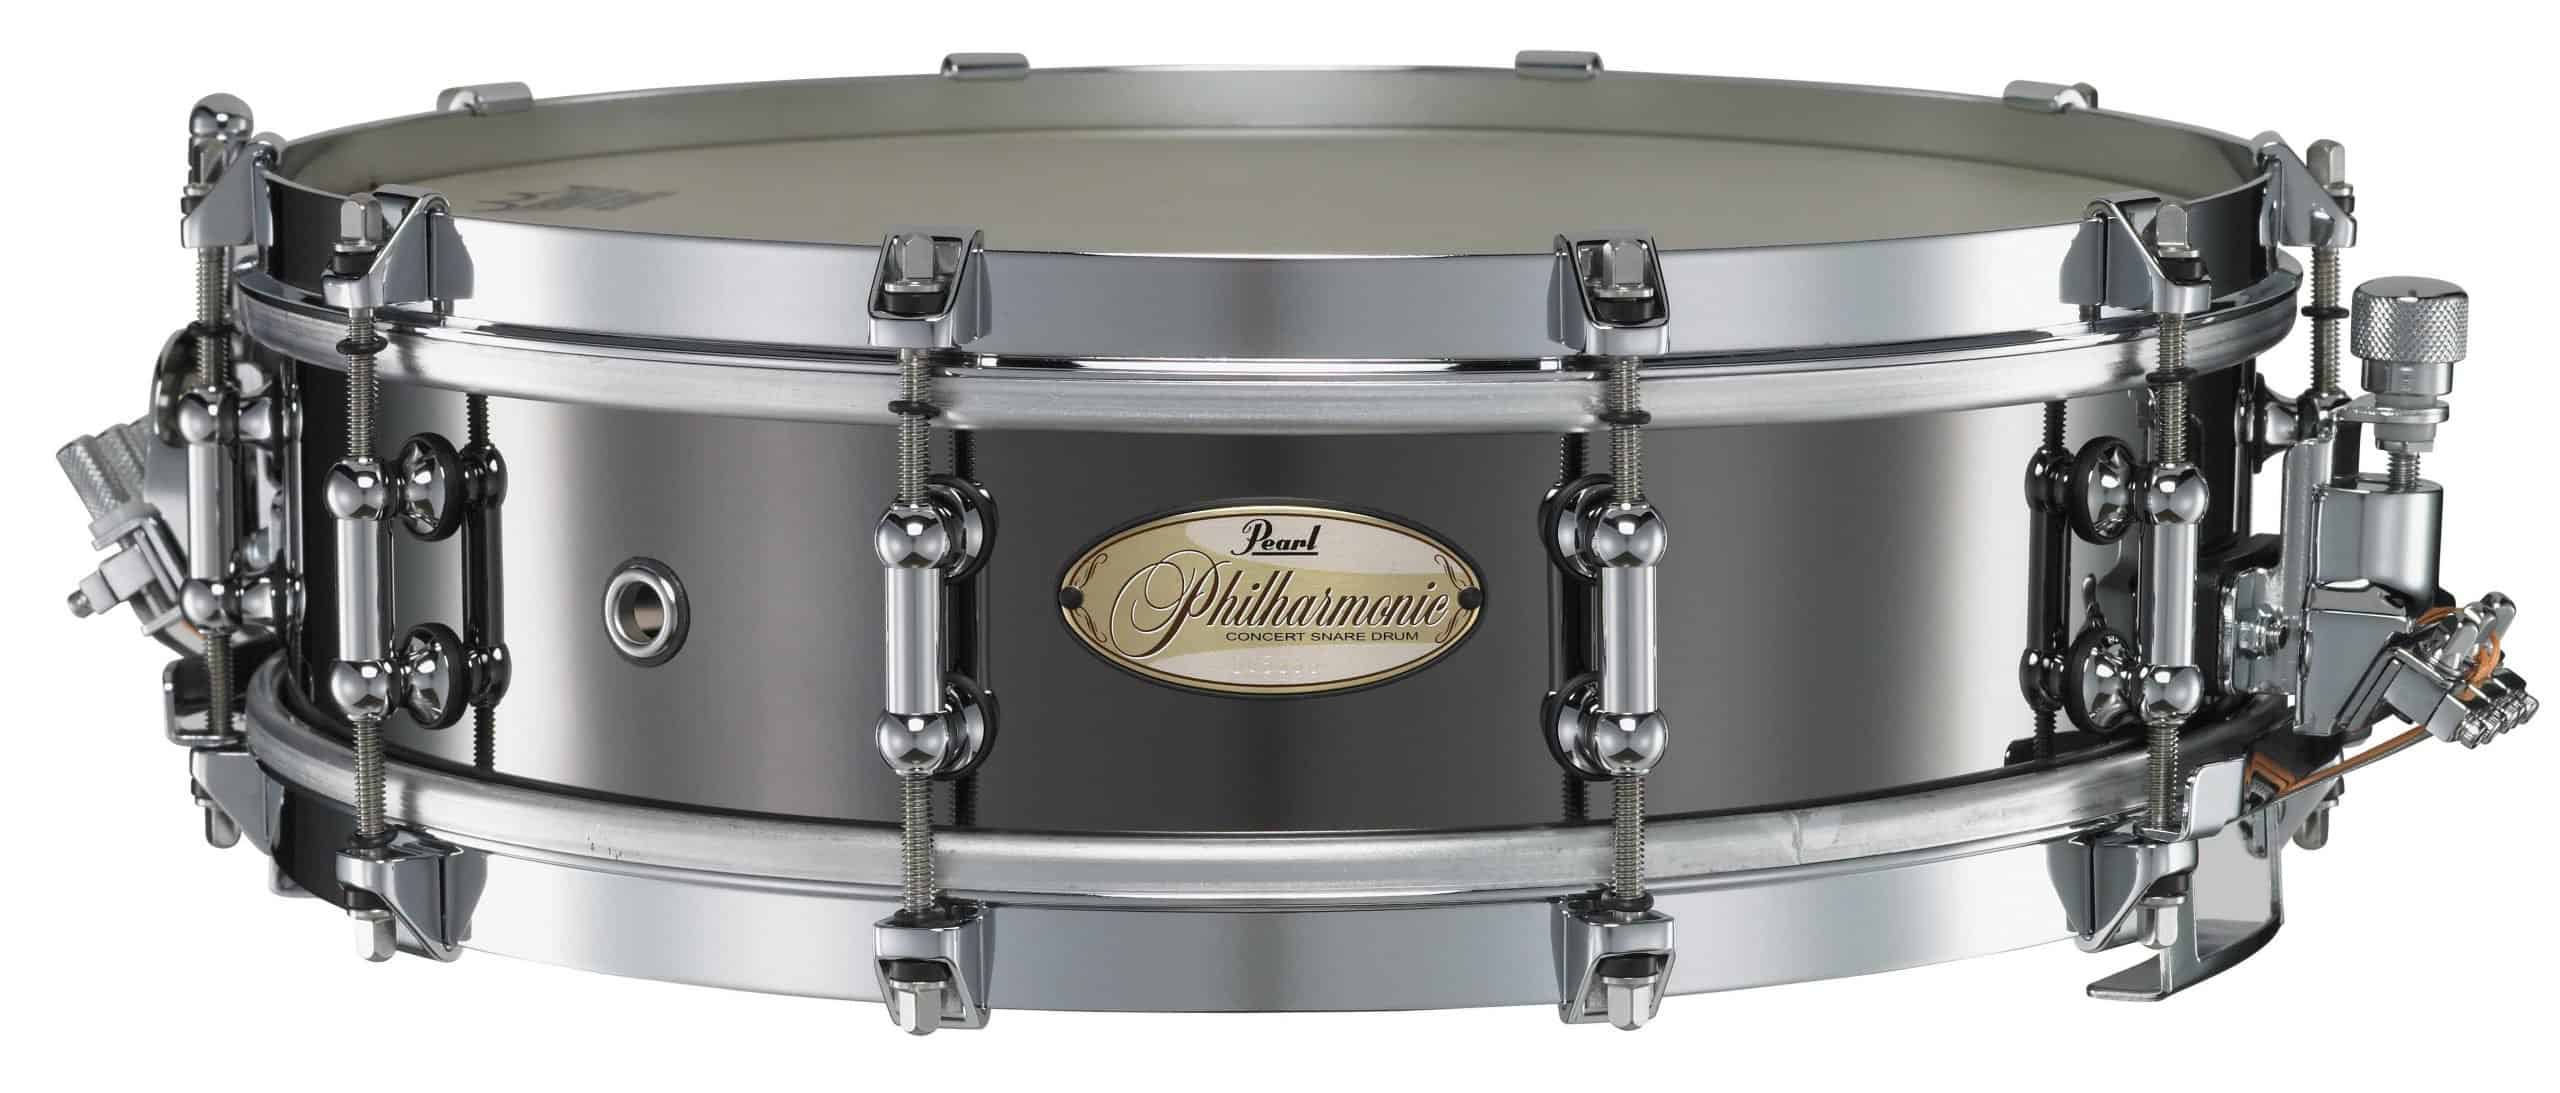 Pearl: Philharmonic Snare Drum Brass 14x4